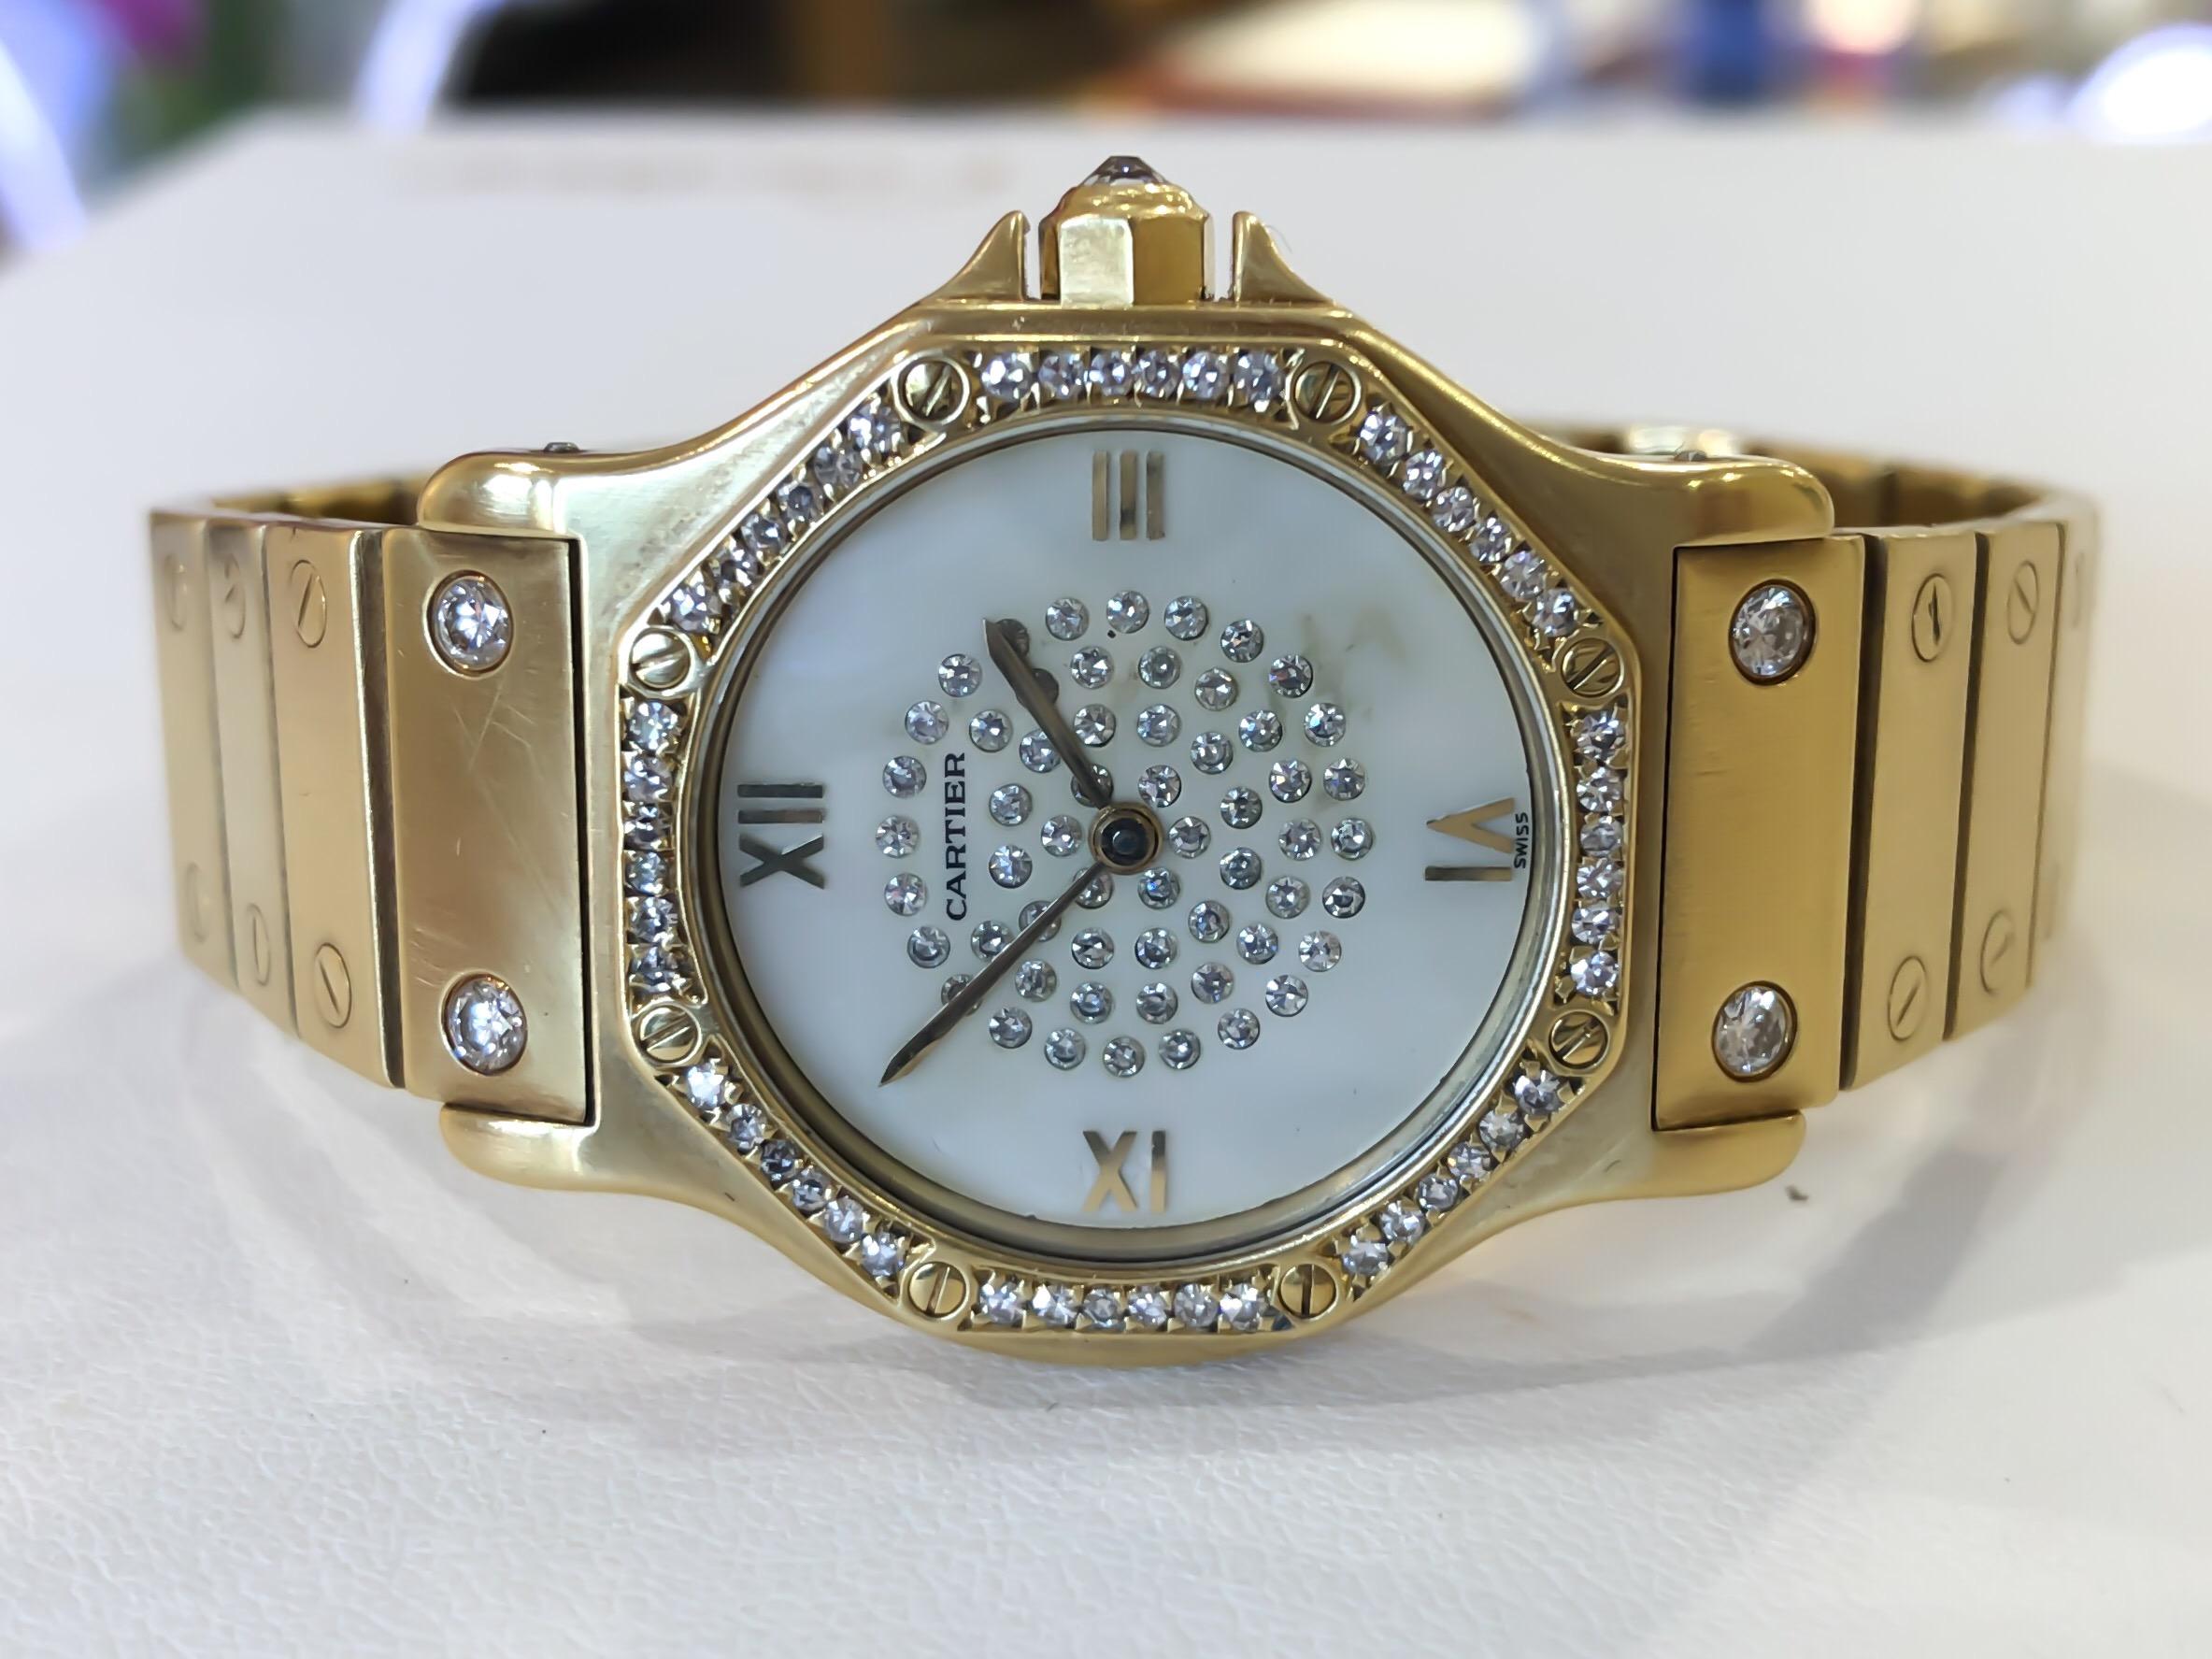 Cartier Santos Octagon Automatic Diamond and Mother of Pearl on Bracelet 1.50ctw

•MOVEMENT: AUTOMATIC SELF WINDING
•CASE MATERIAL: SOLID 18 KARAT YELLOW GOLD
•CONDITION: EXCELLENT PRE-OWNED *Fine scratches on bracelet, can be polish upon request.